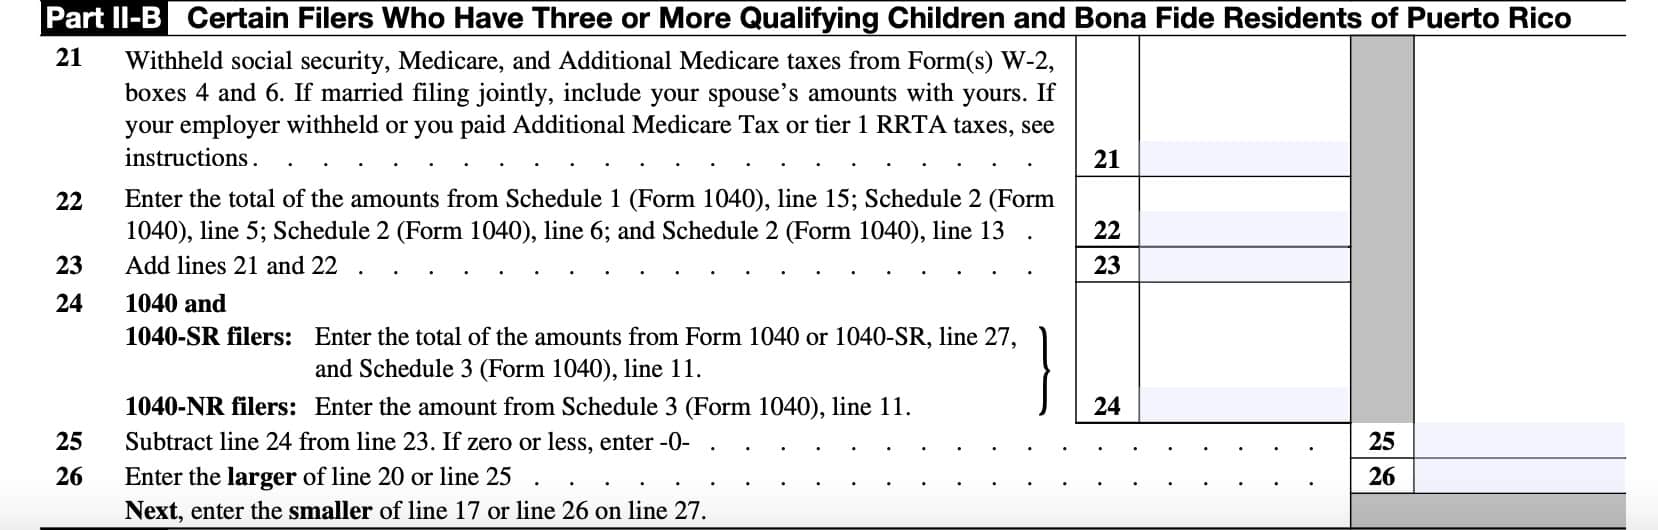 Schedule 8812, part II-B: 3 or more qualifying children and bona fide residents of puerto rico